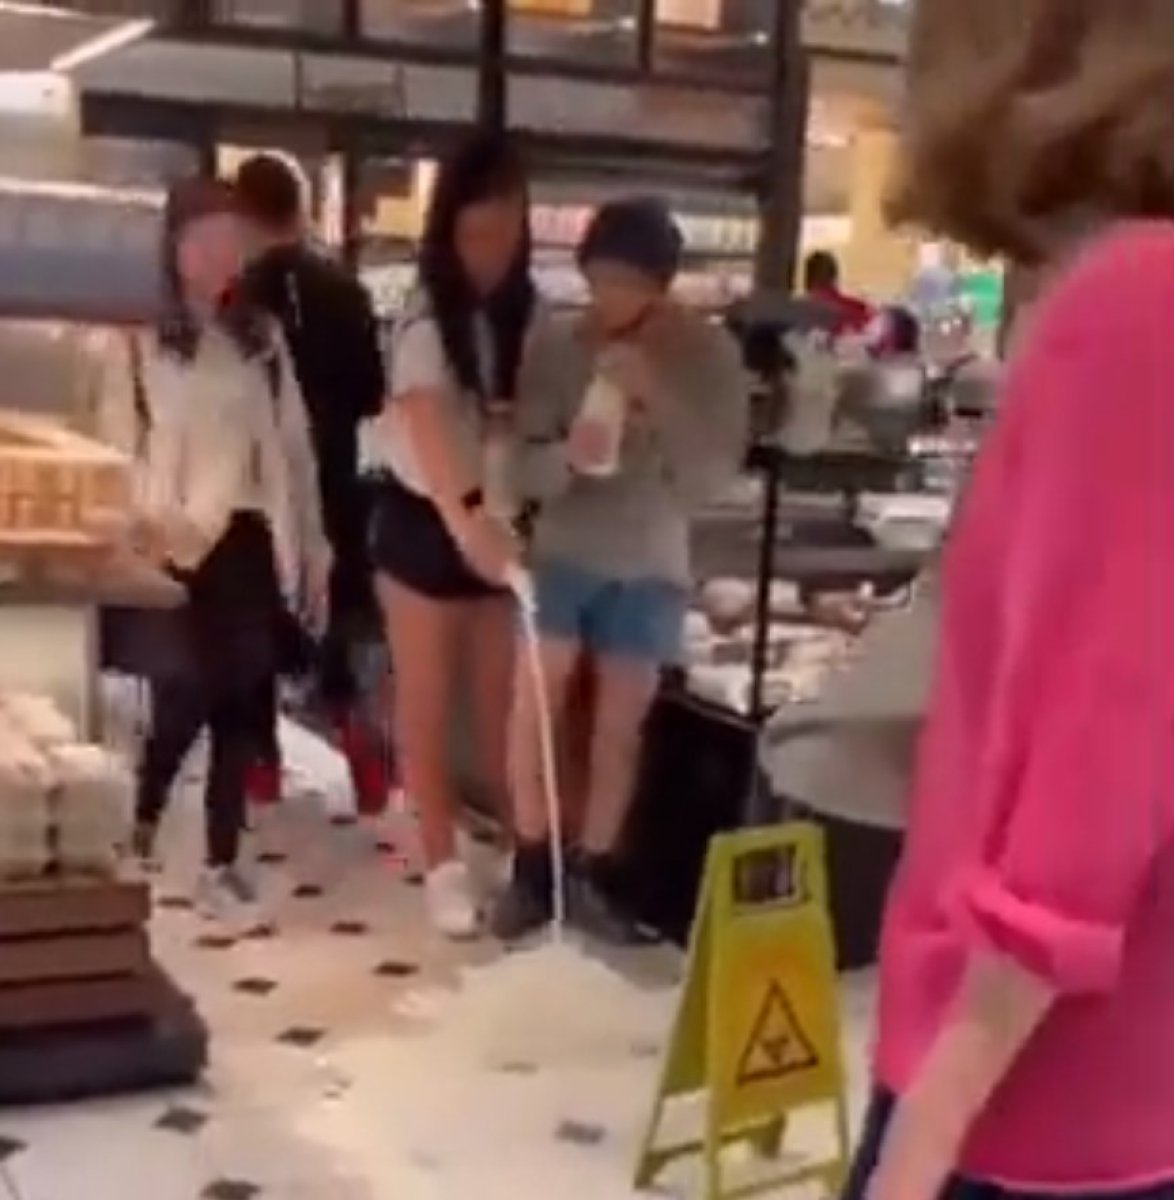 A group of vegans in England spilled milk on the floor #2